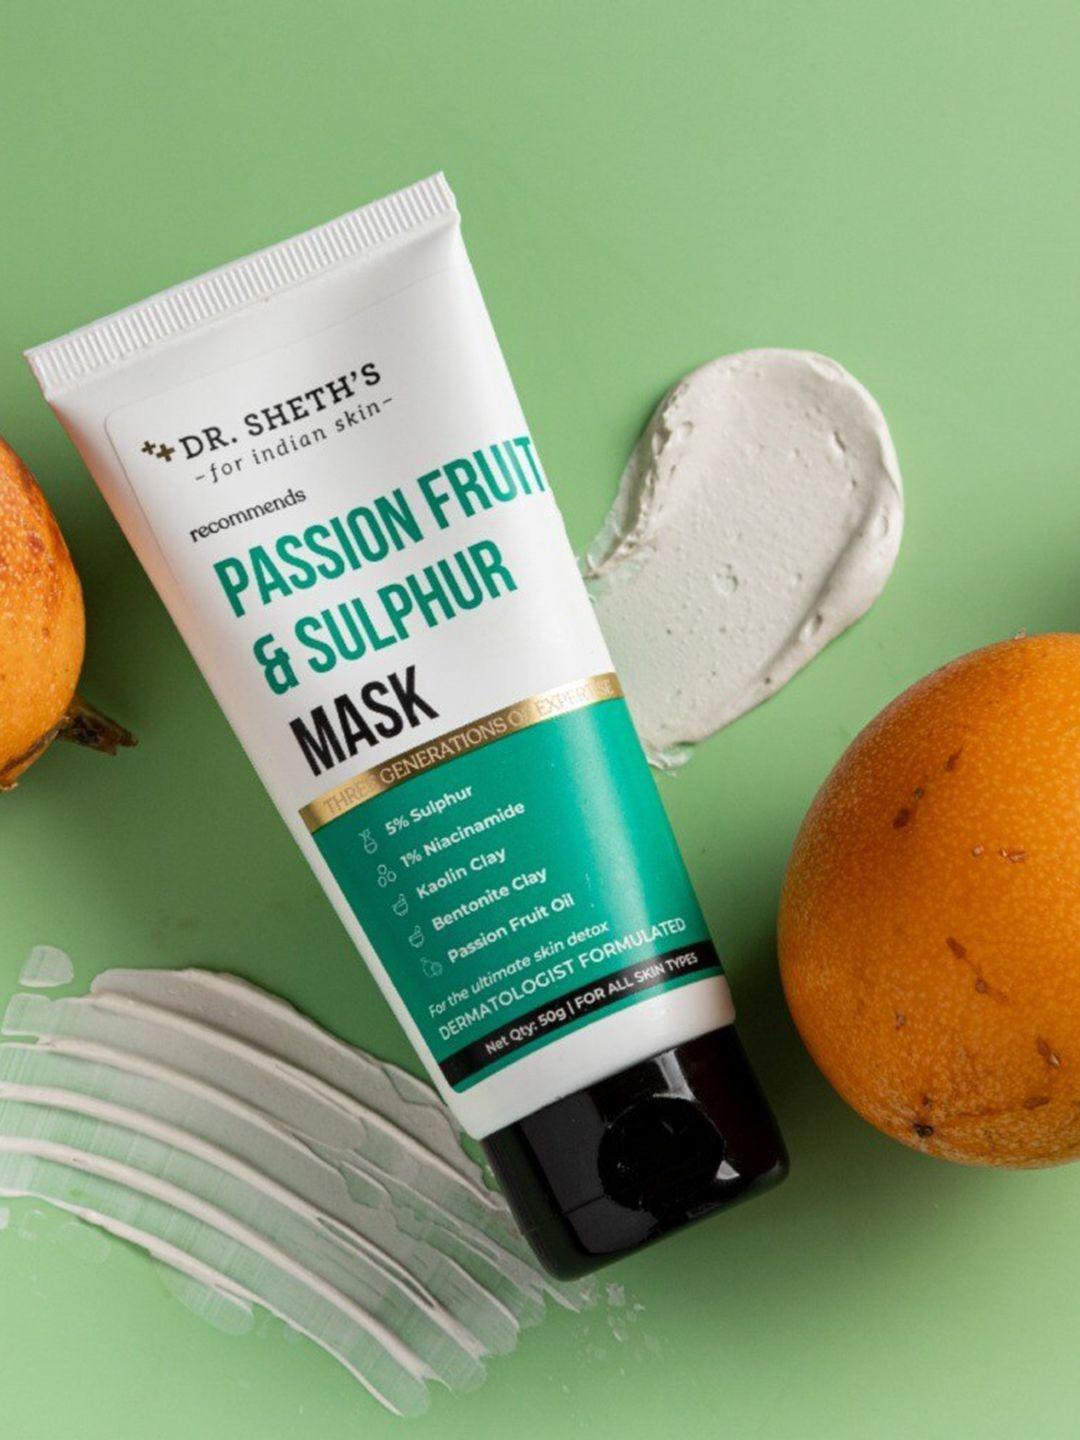 dr.-sheths-passion-fruit-&-sulphur-face-mask-with-niacinamide-&-kaolin-clay---50-g